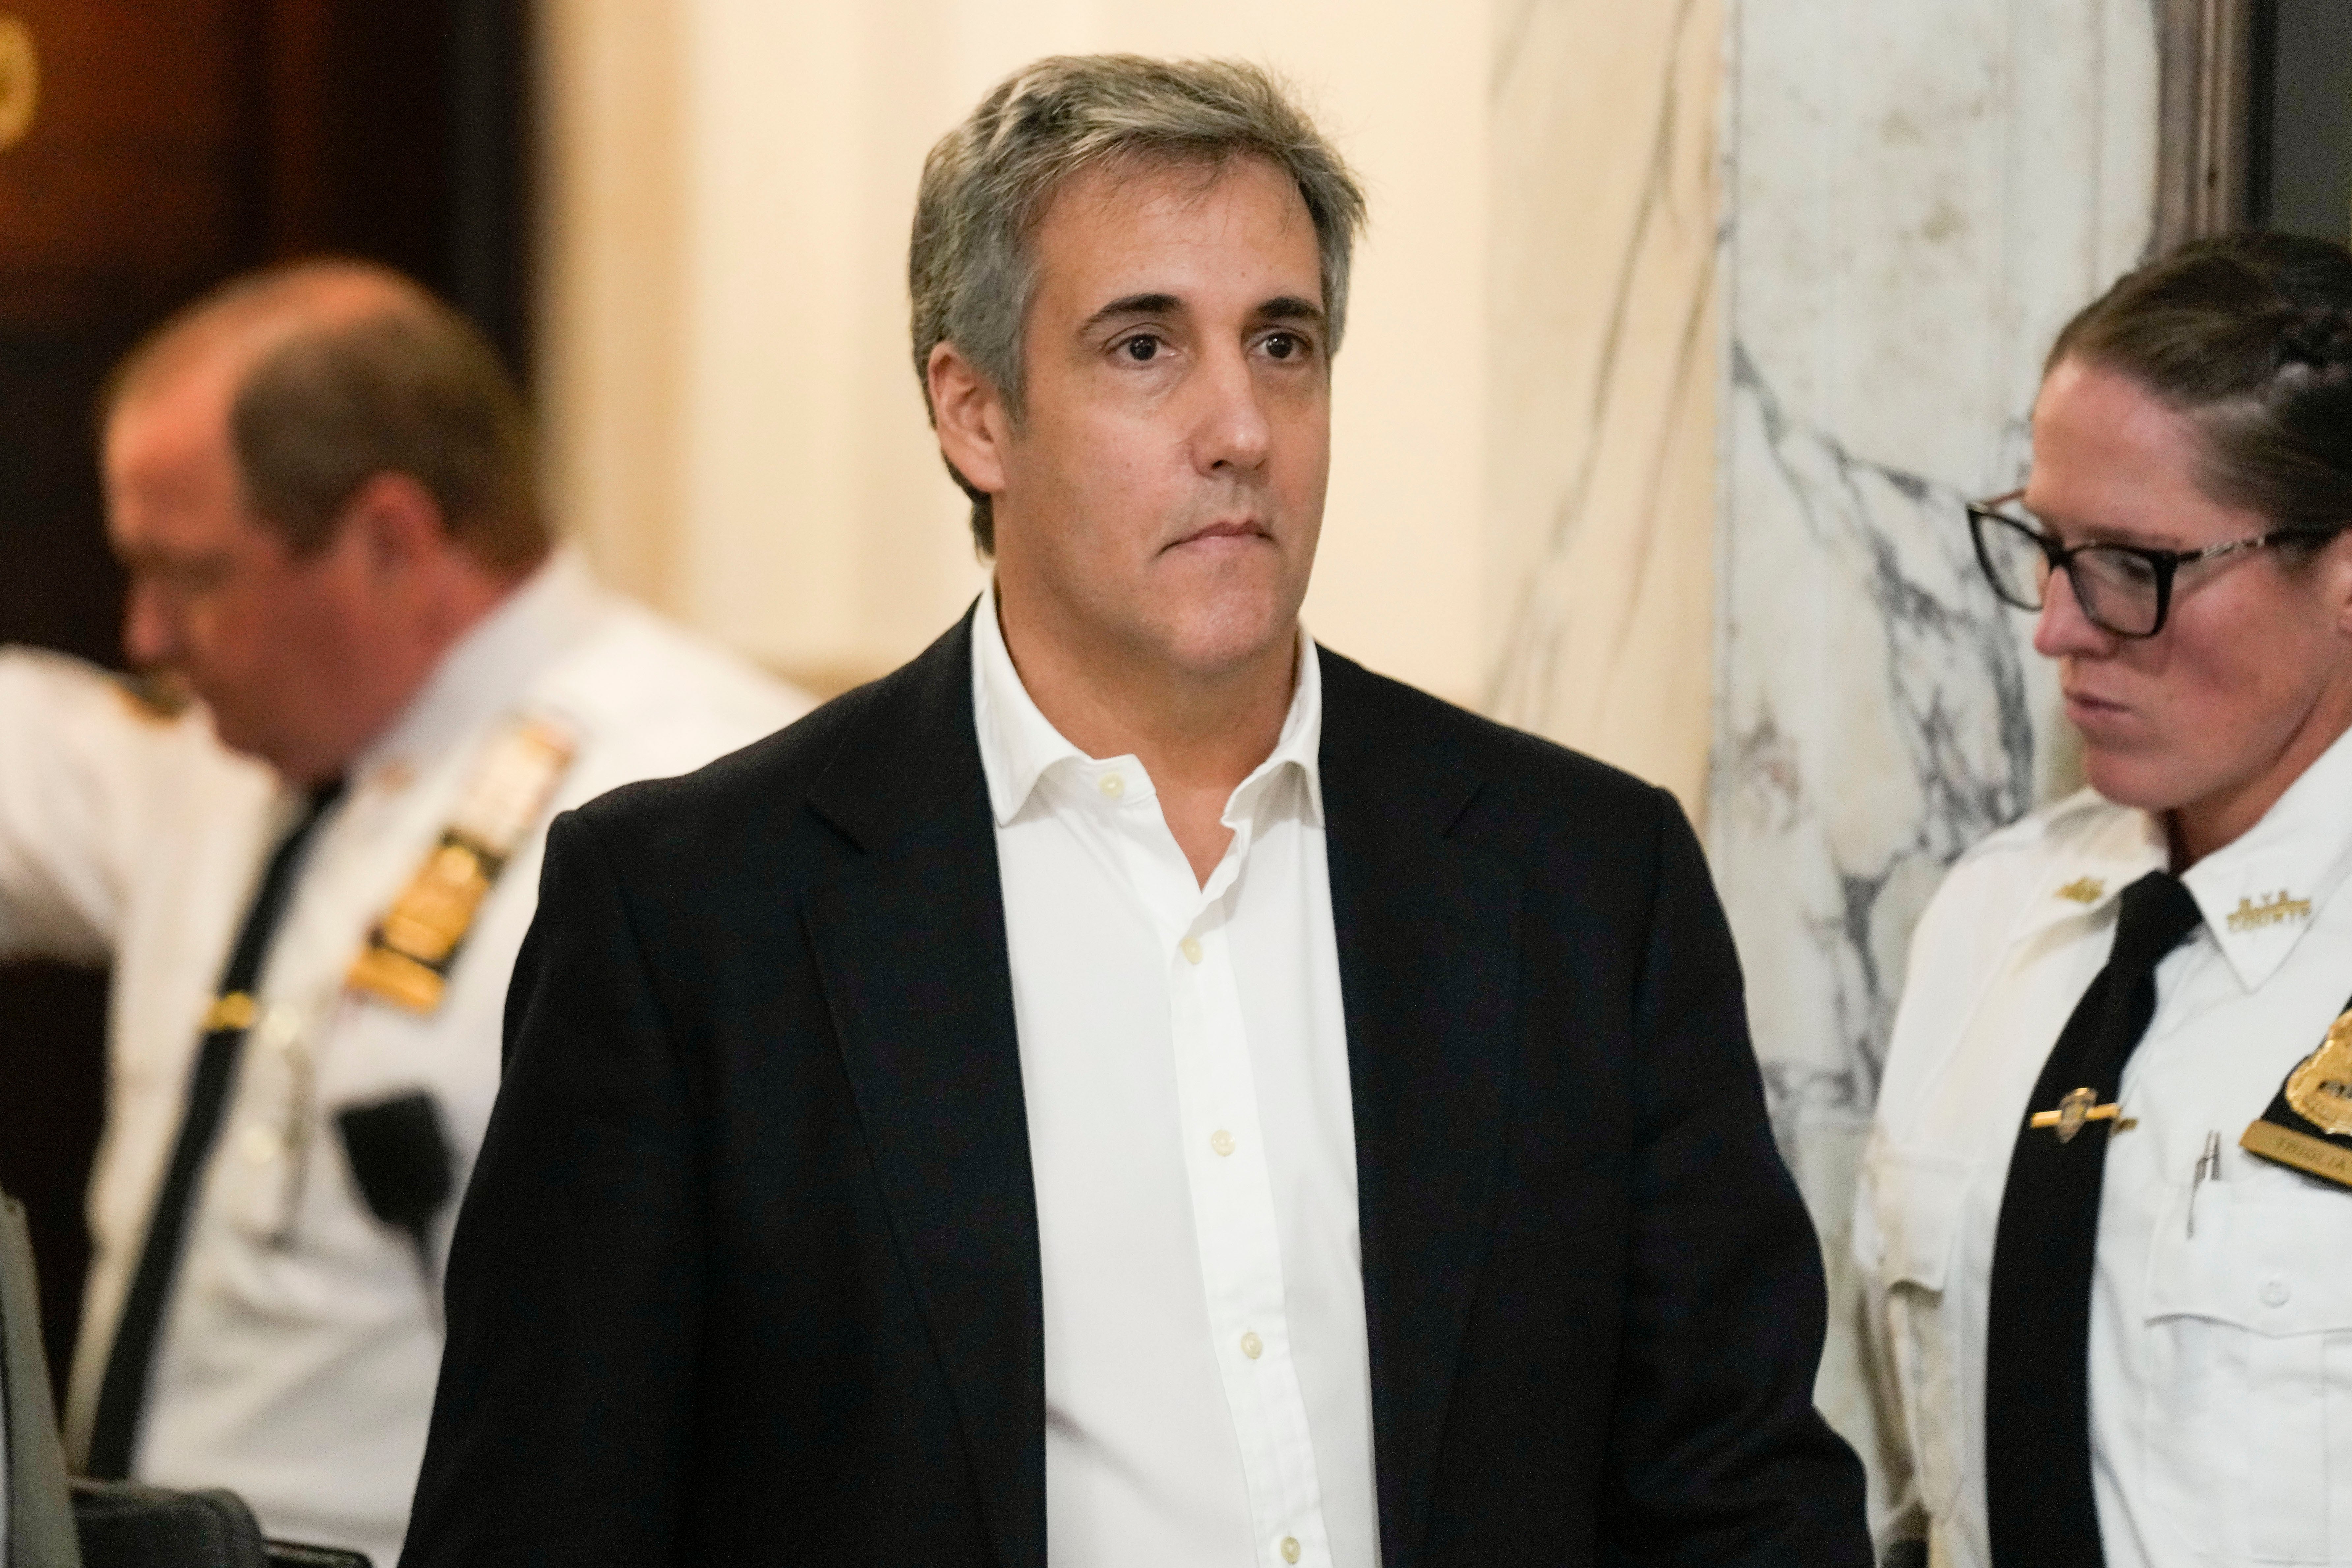 Michael Cohen in October 2023. Cohen is a key witness in the criminal trial against Donald Trump over alleged hush money payments